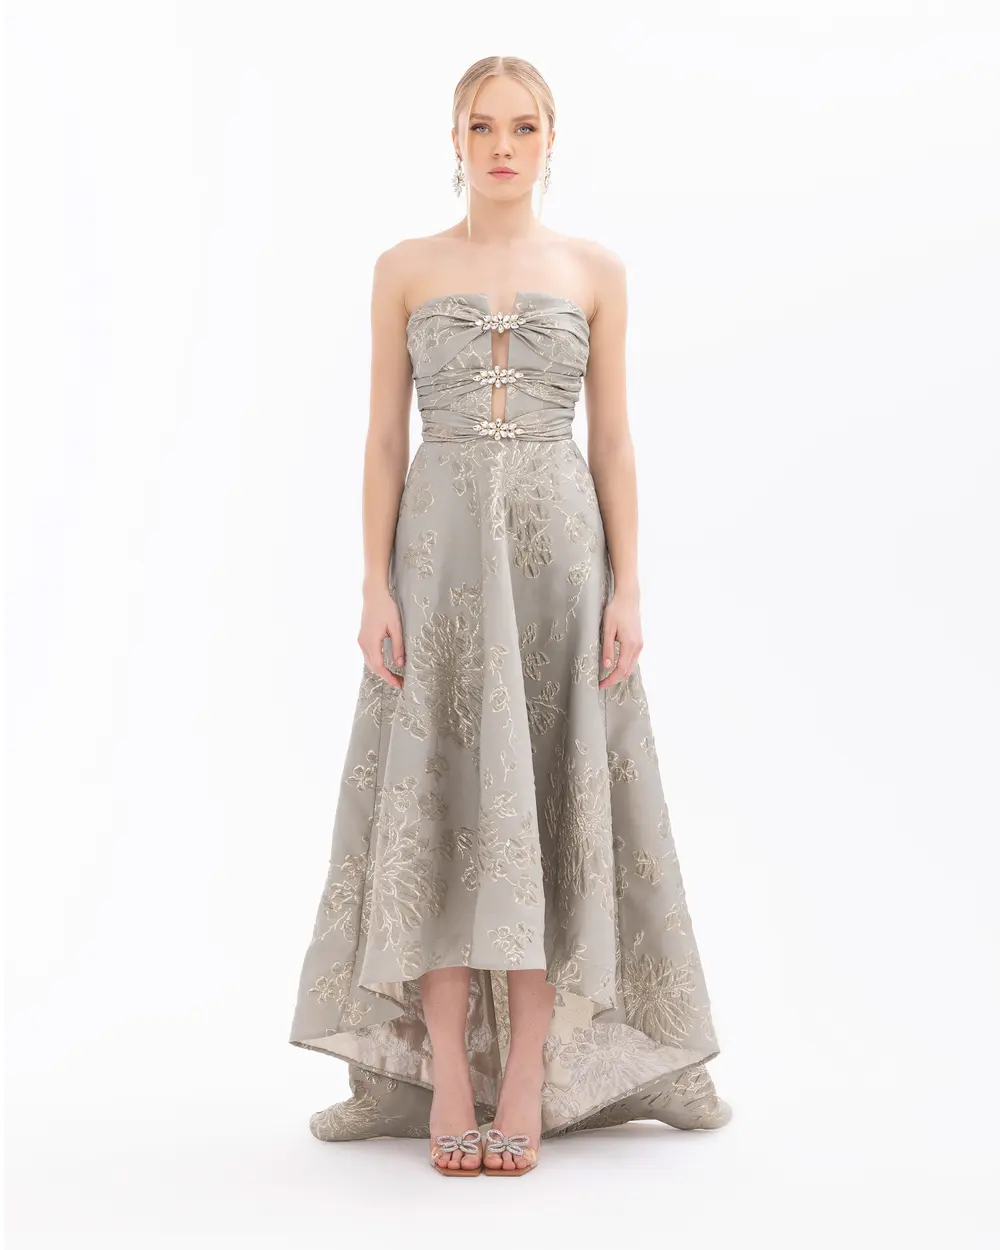 Strapless Jacquard Evening Dress with Stones